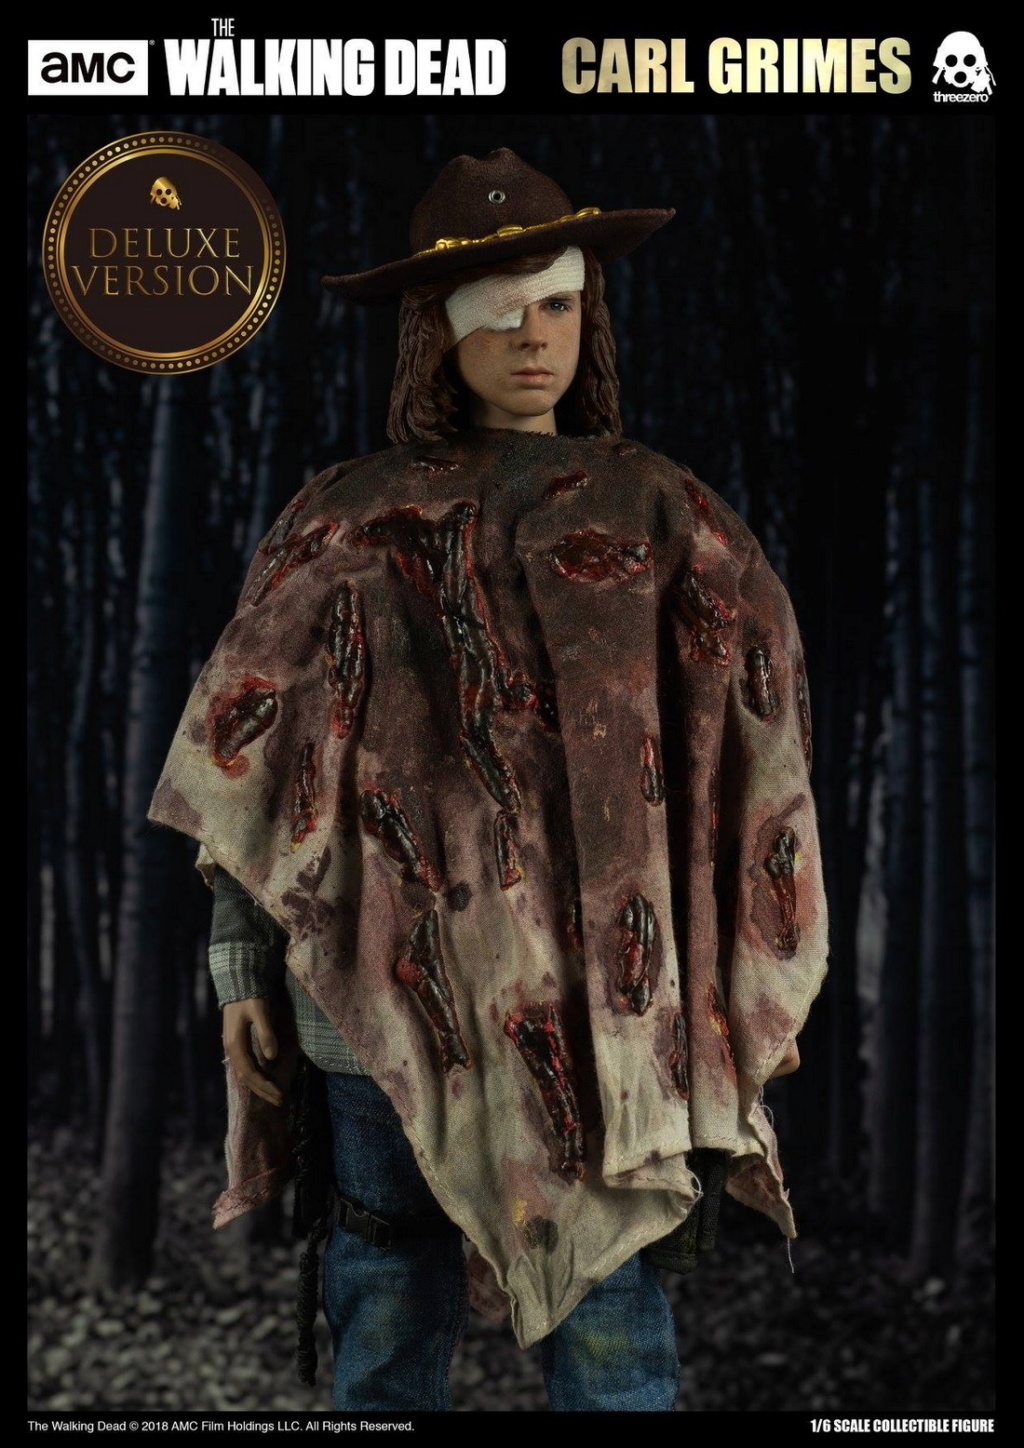 CarlGrimes - NEW PRODUCT: ThreeZero New: 1/6 "TheWalkingDead / Walking Dead" - Carl / Carl Grimes can be moved 10395410